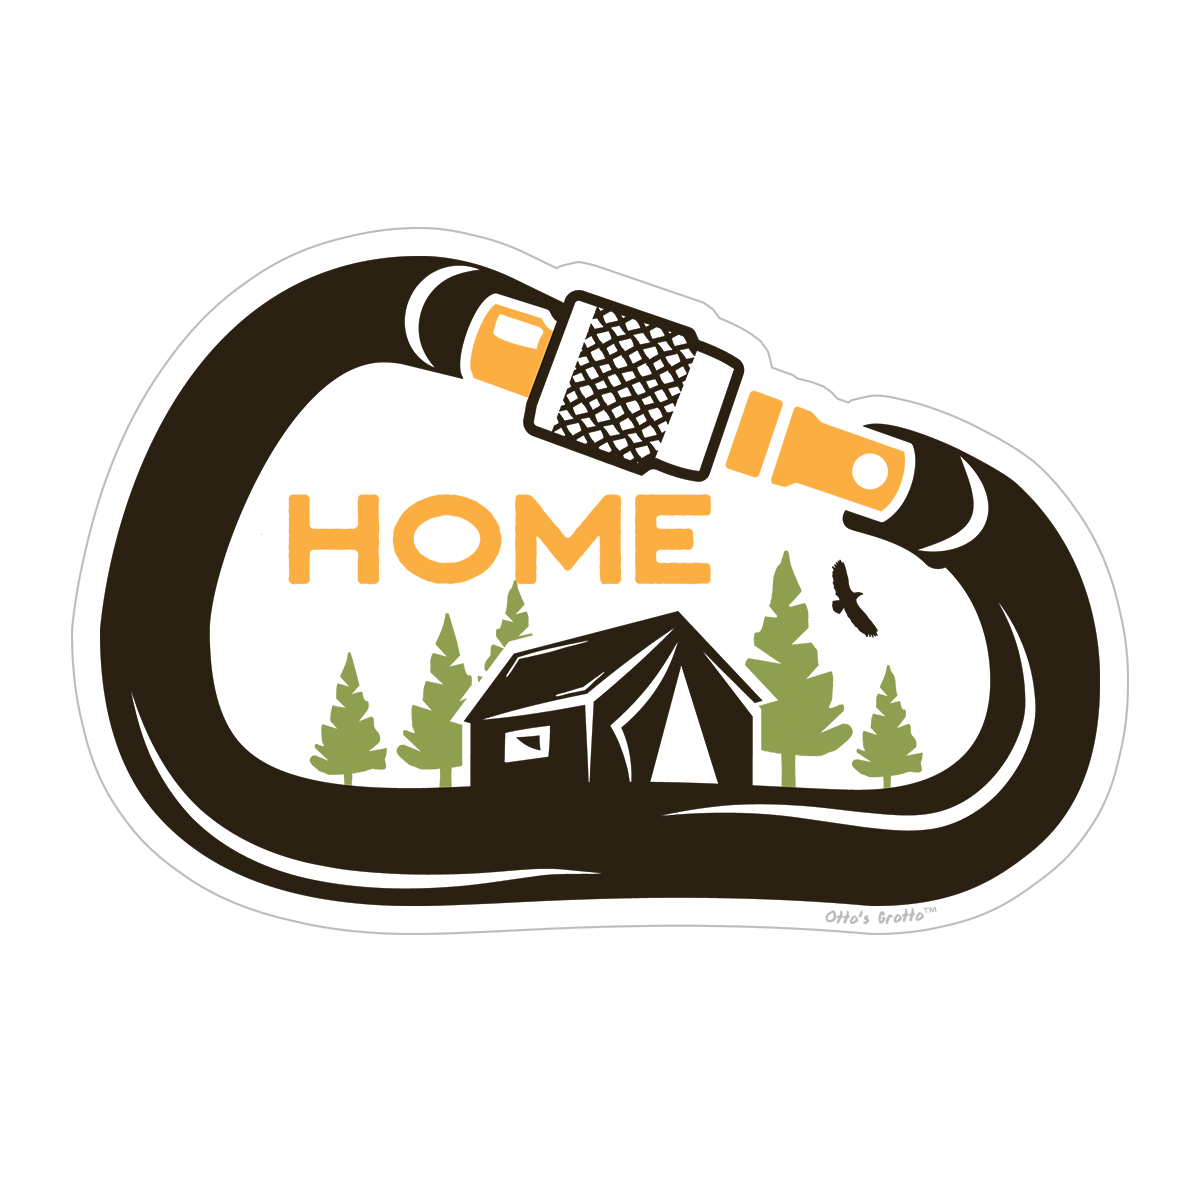 Outdoor Living Sticker Forest Sticker Hiking Sticker Carabiner Sticker for Hikers - Climbers